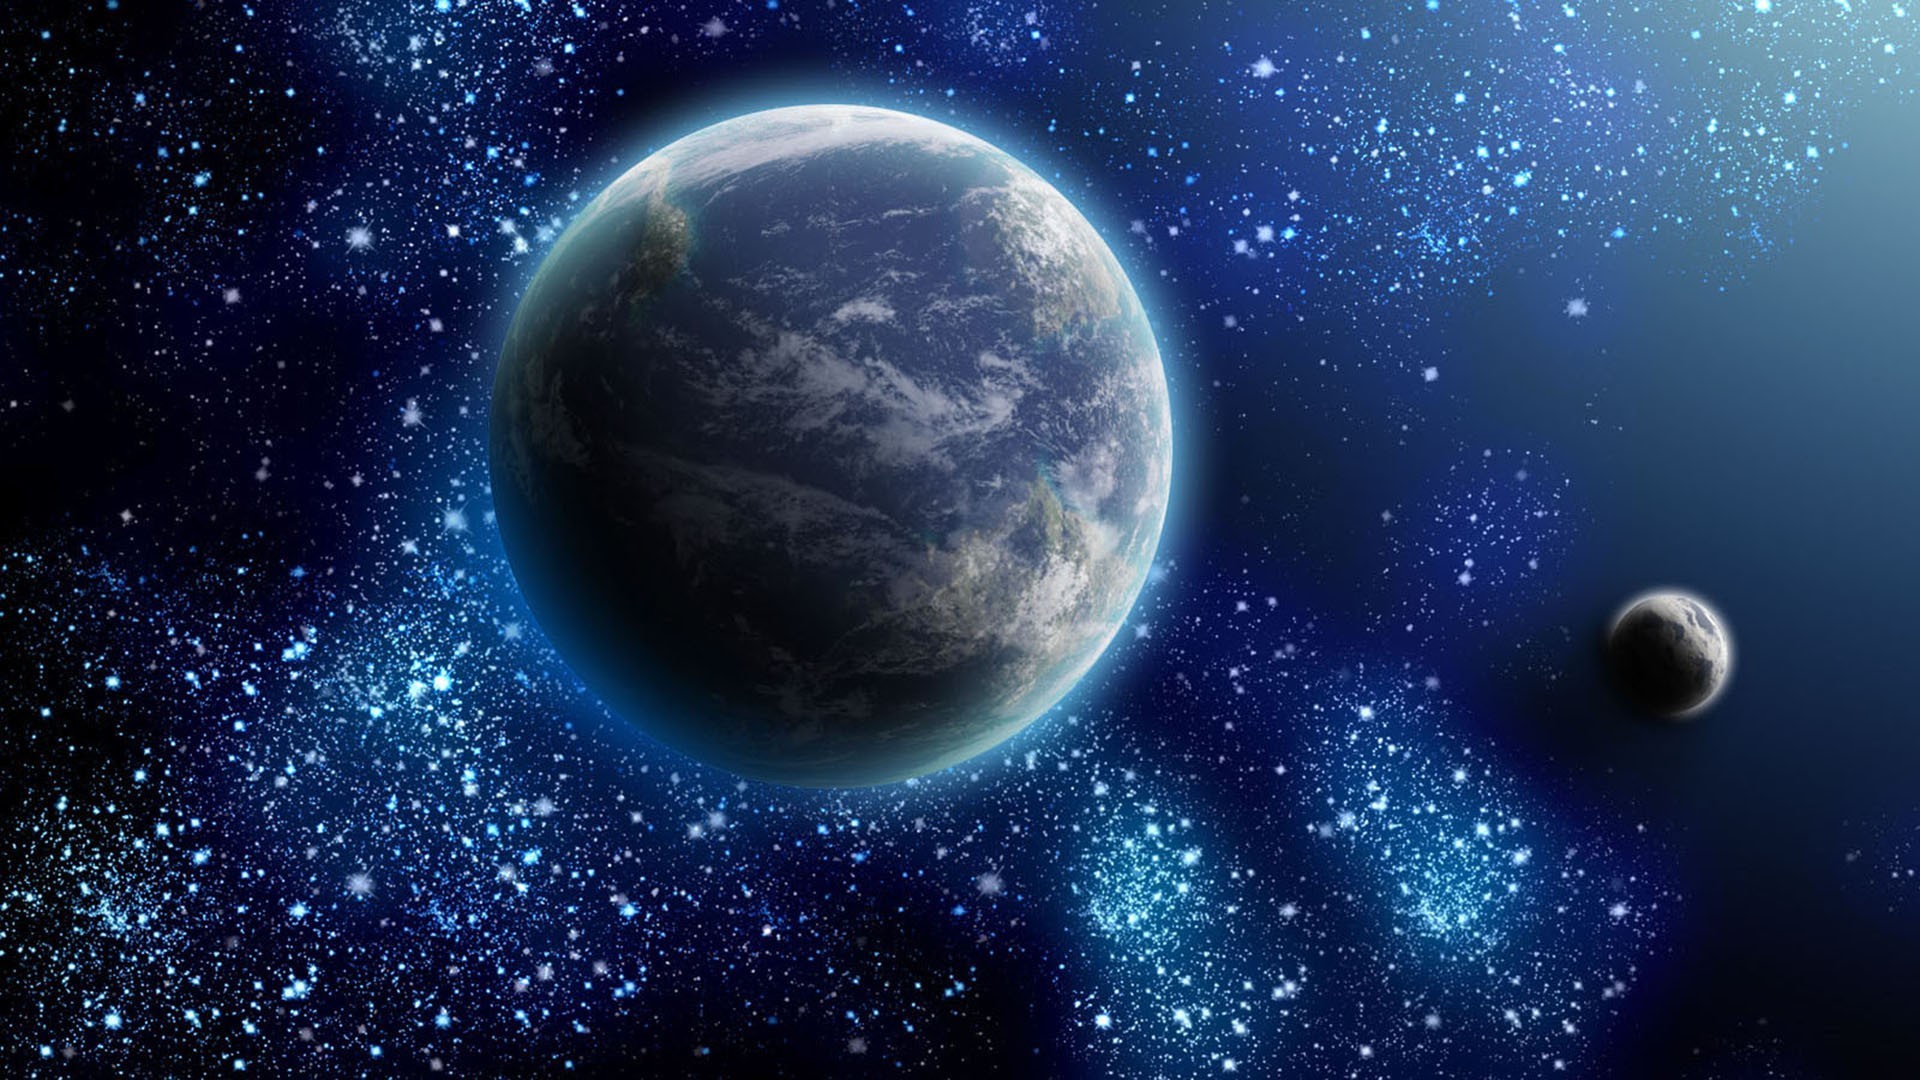 1920x1080 Earth and moon surrounded by stars wallpaper 3515 